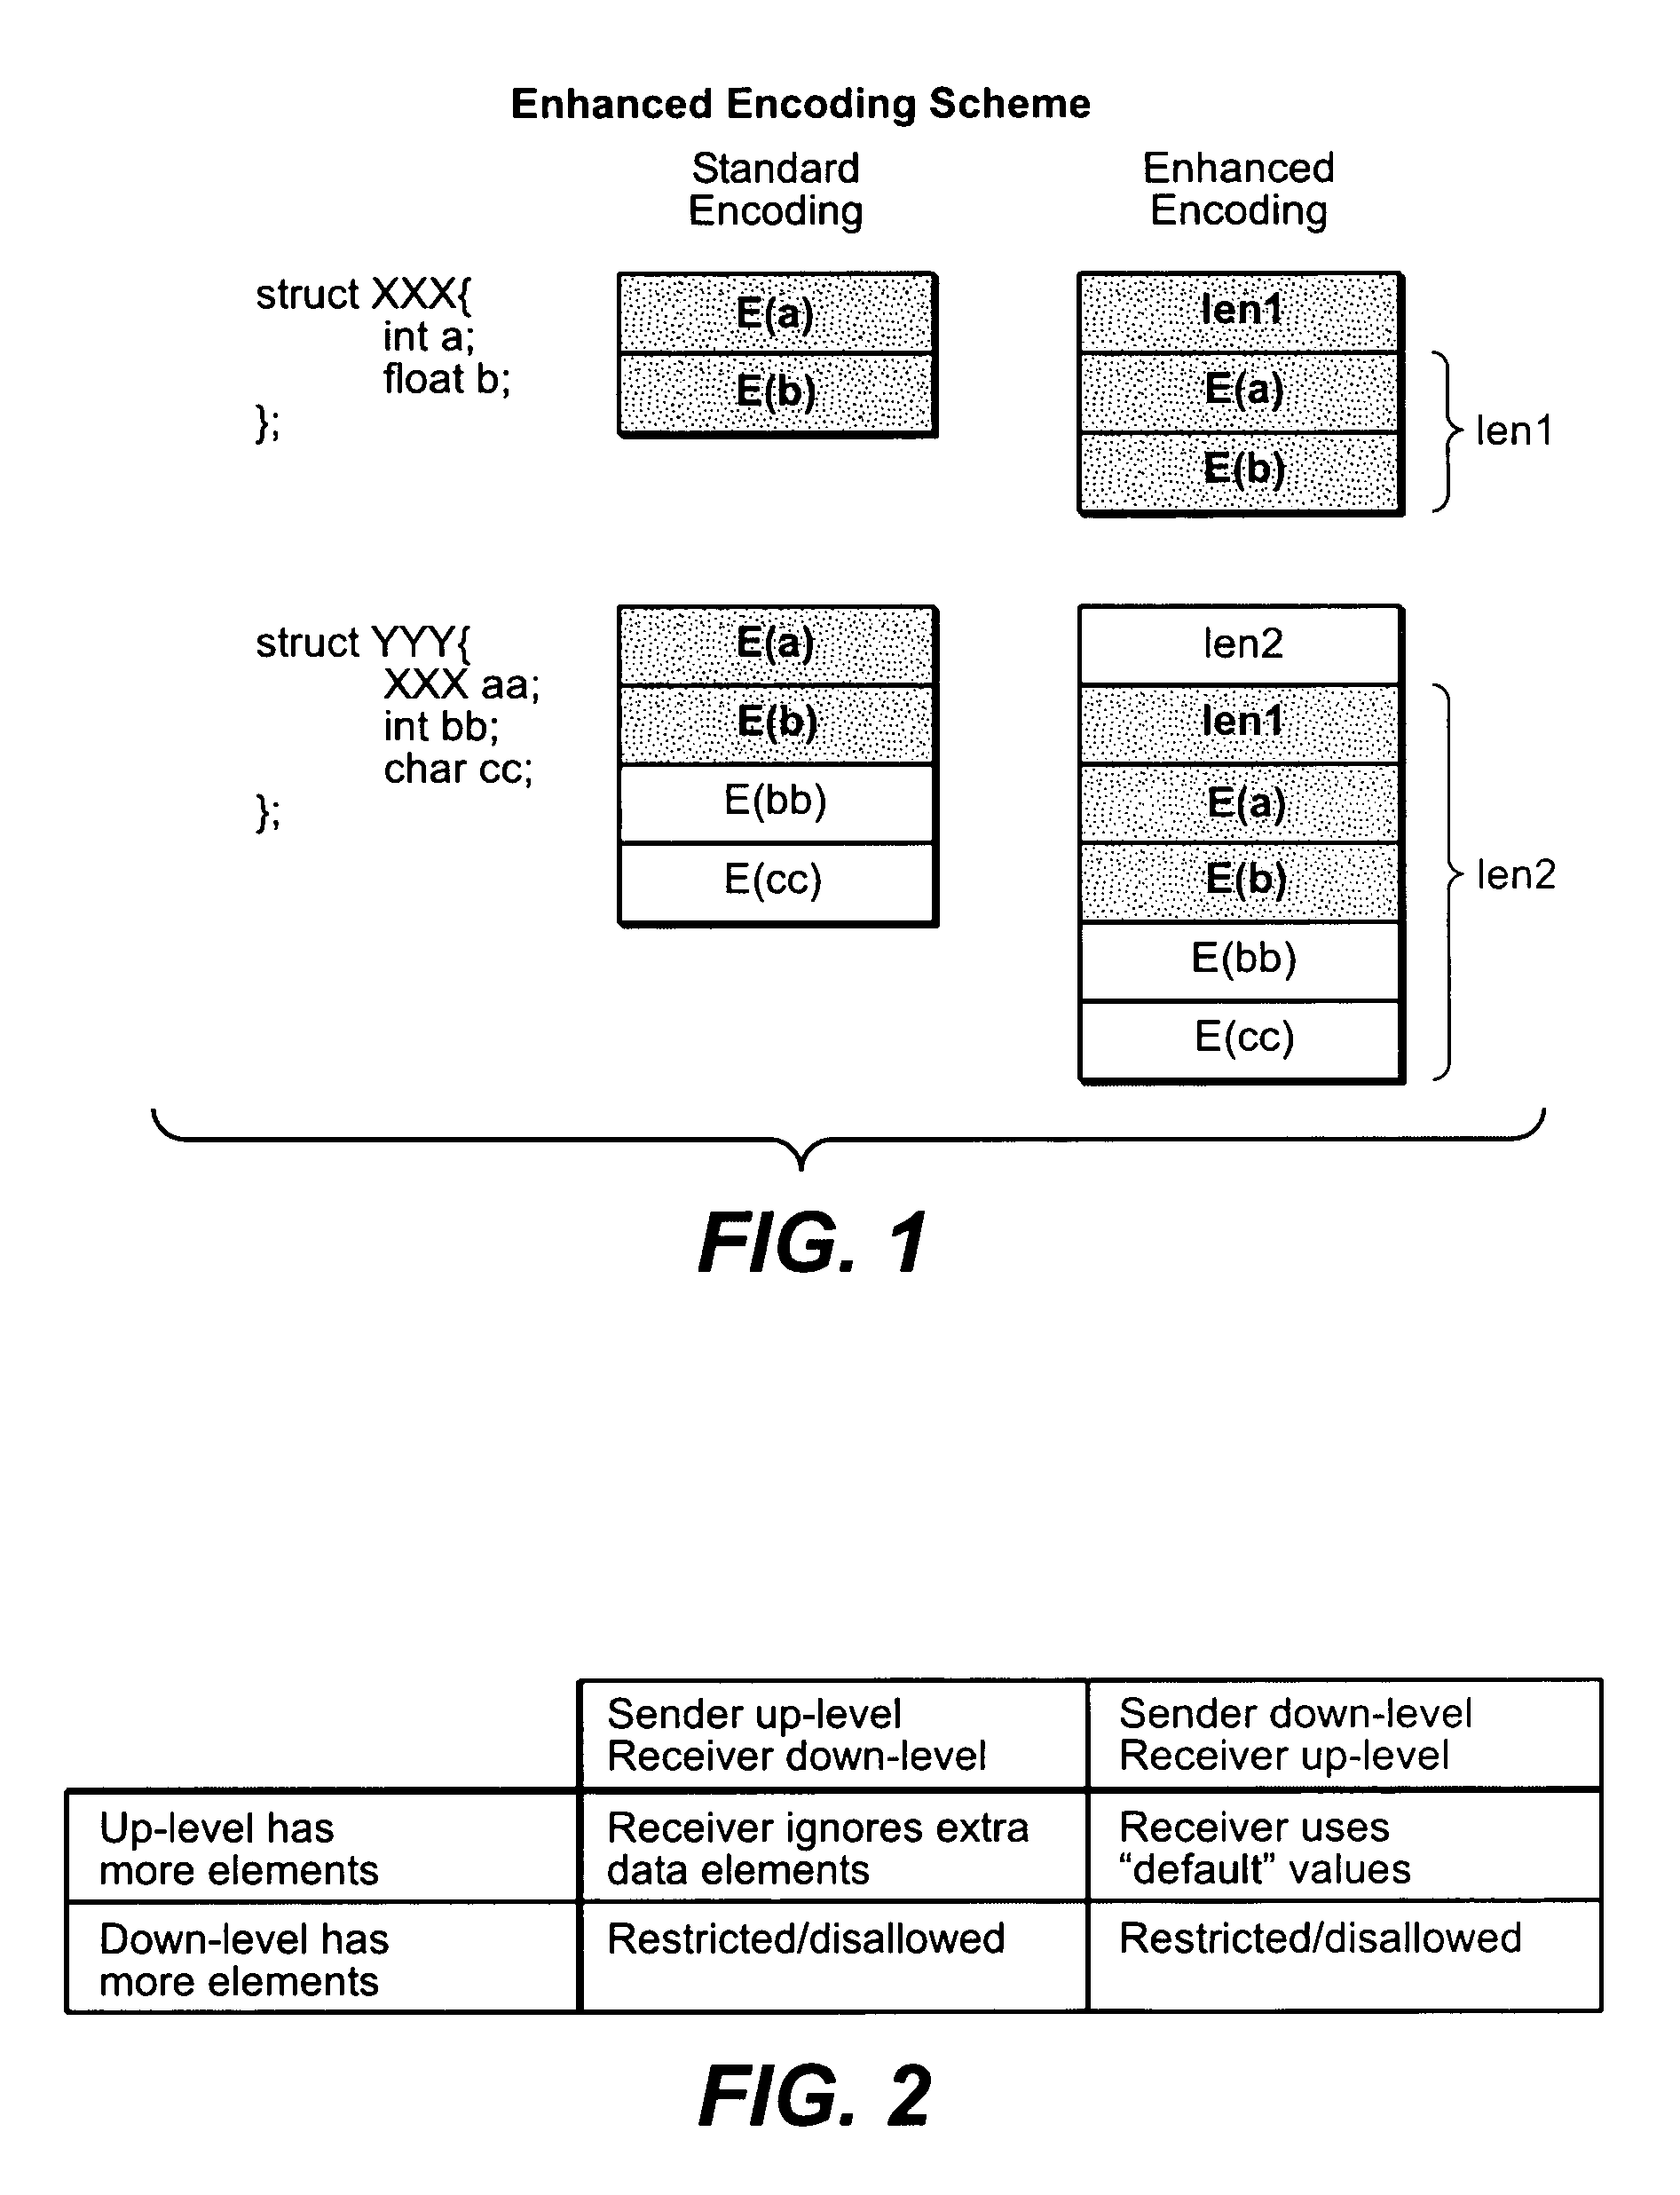 Mechanism for encoding and decoding upgradeable RPC/XDR structures